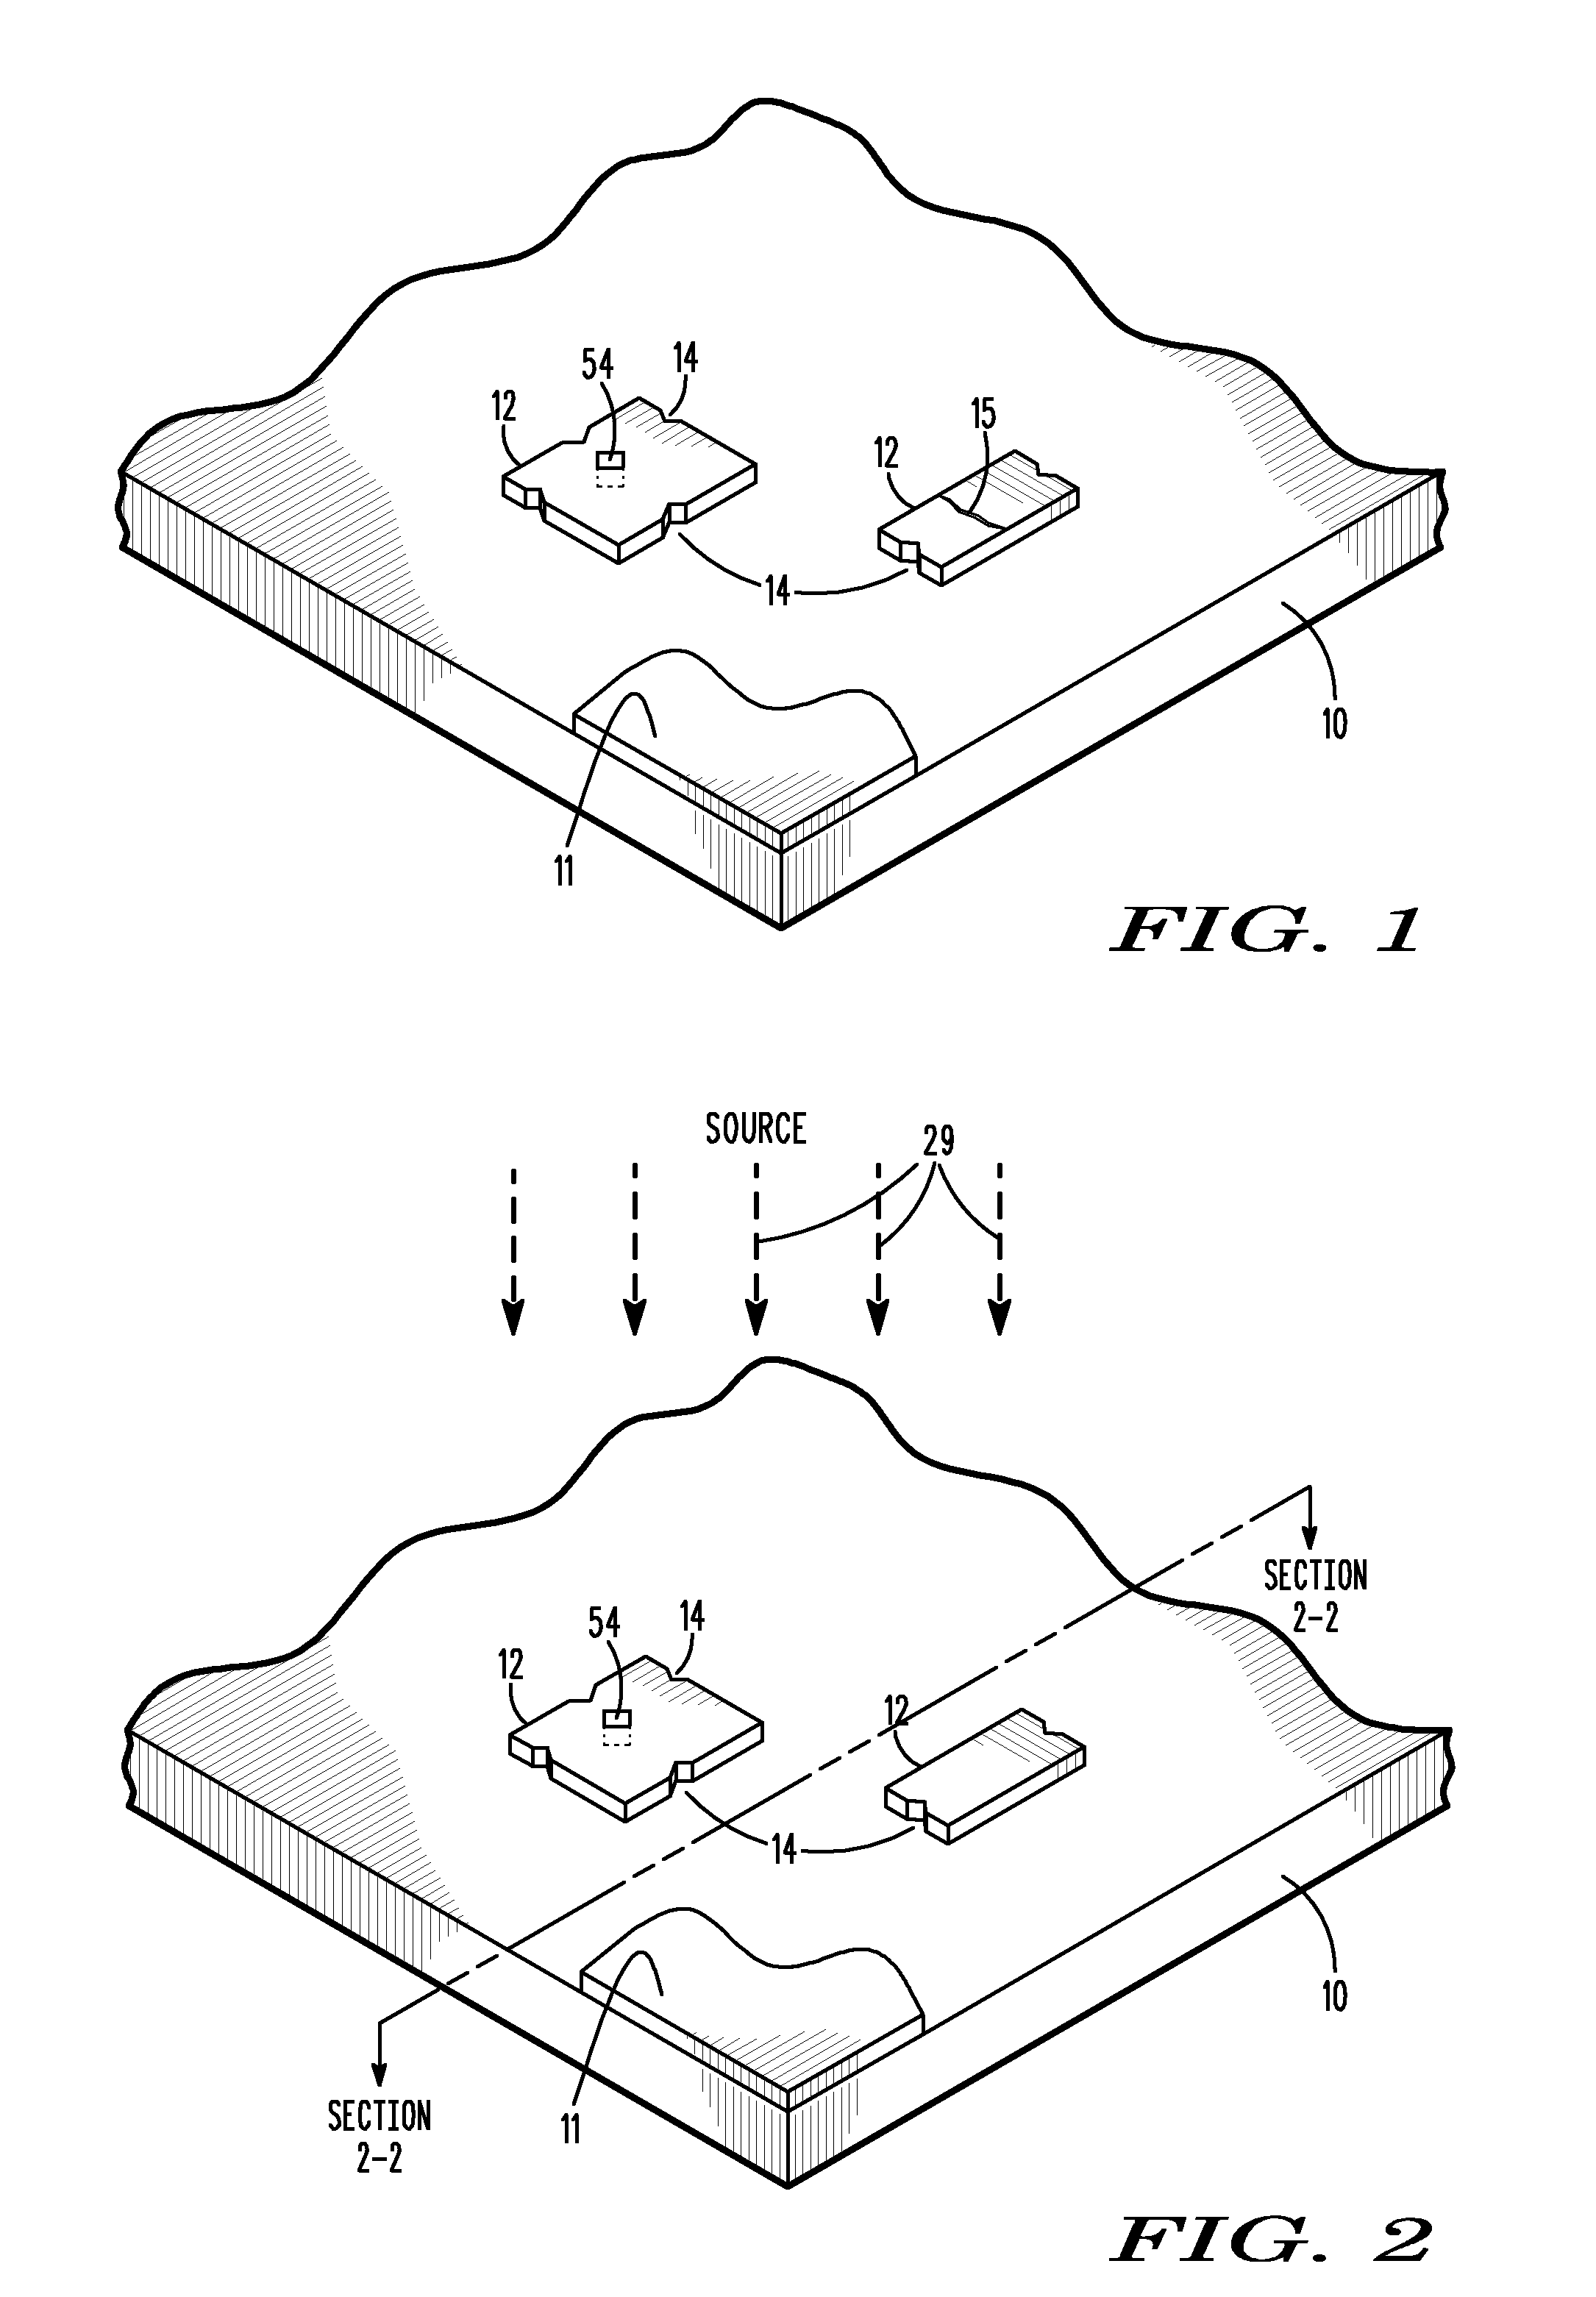 Method and Apparatus for Providing Electrically Isolated Closely Spaced Features on a Printed Circuit Board